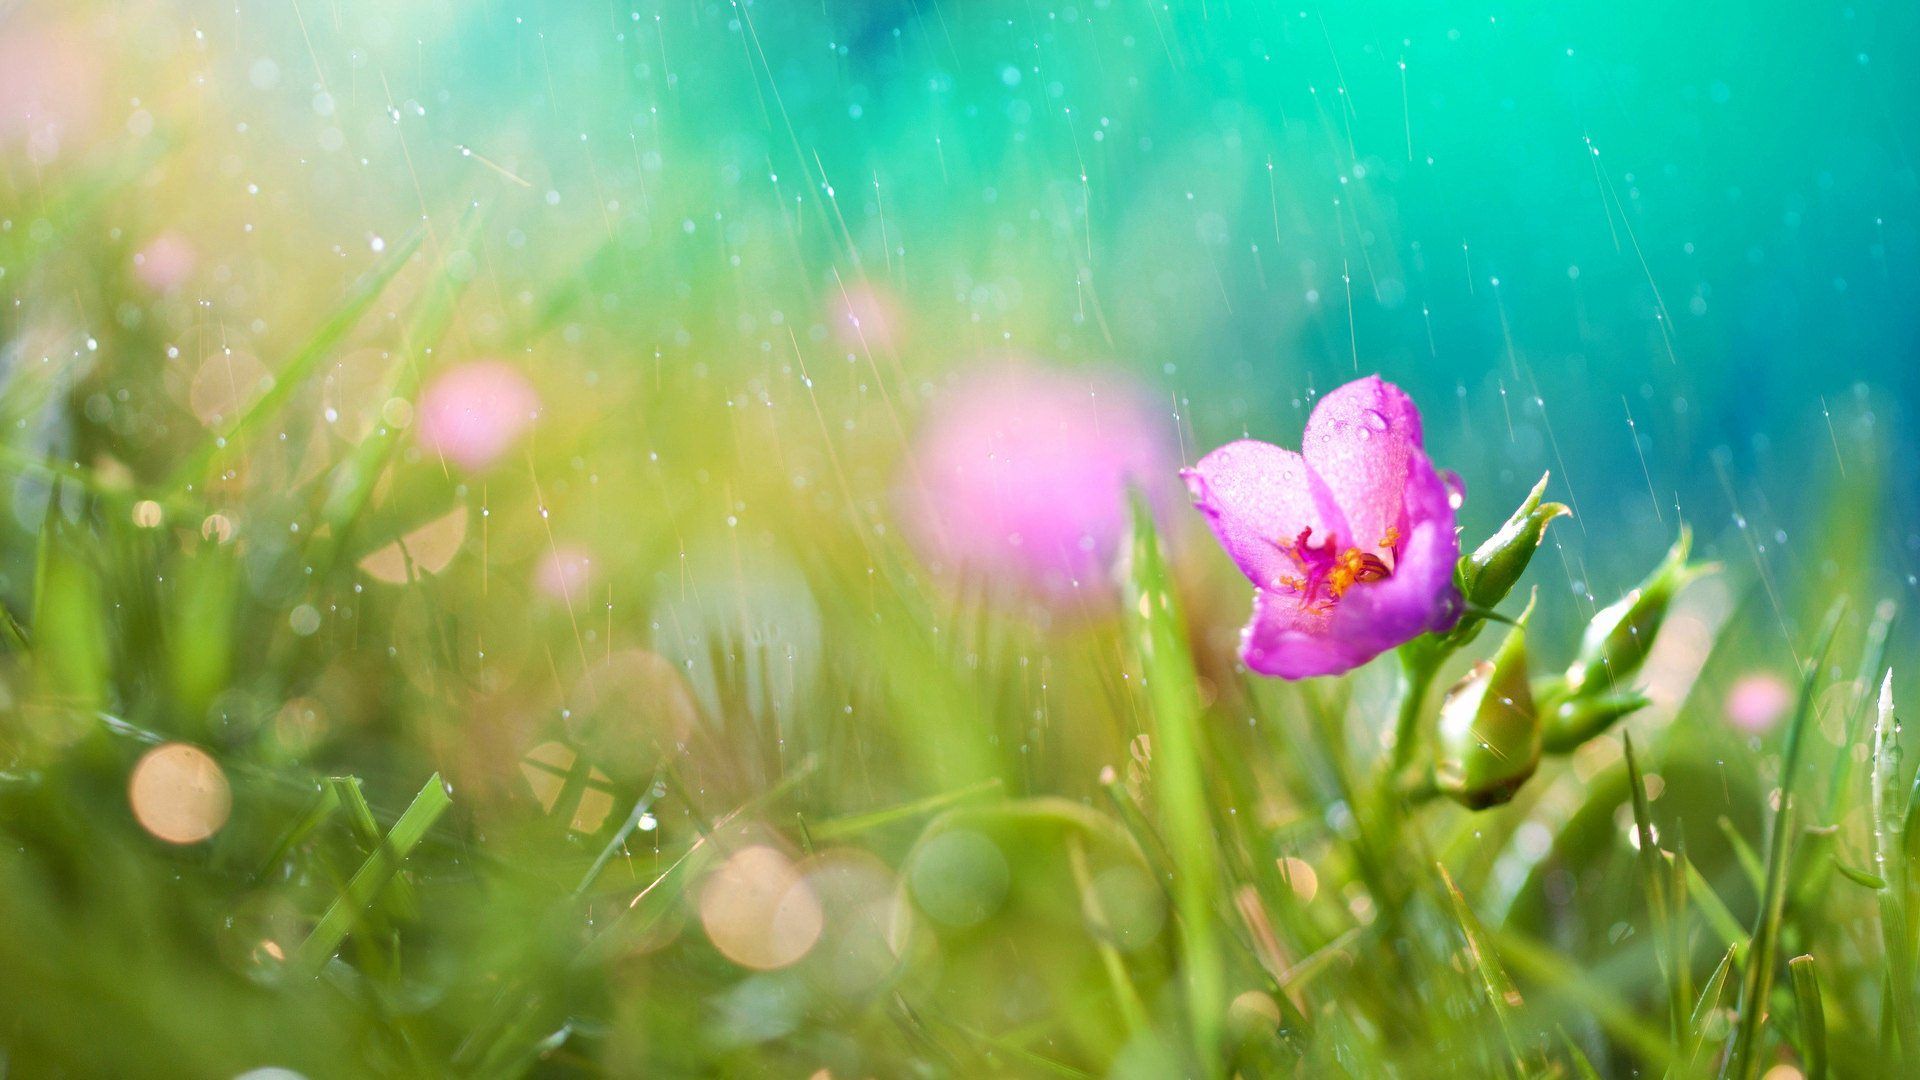 Most Beautiful Rainy Day Wallpaper Gallery | HD Wallpapers ...